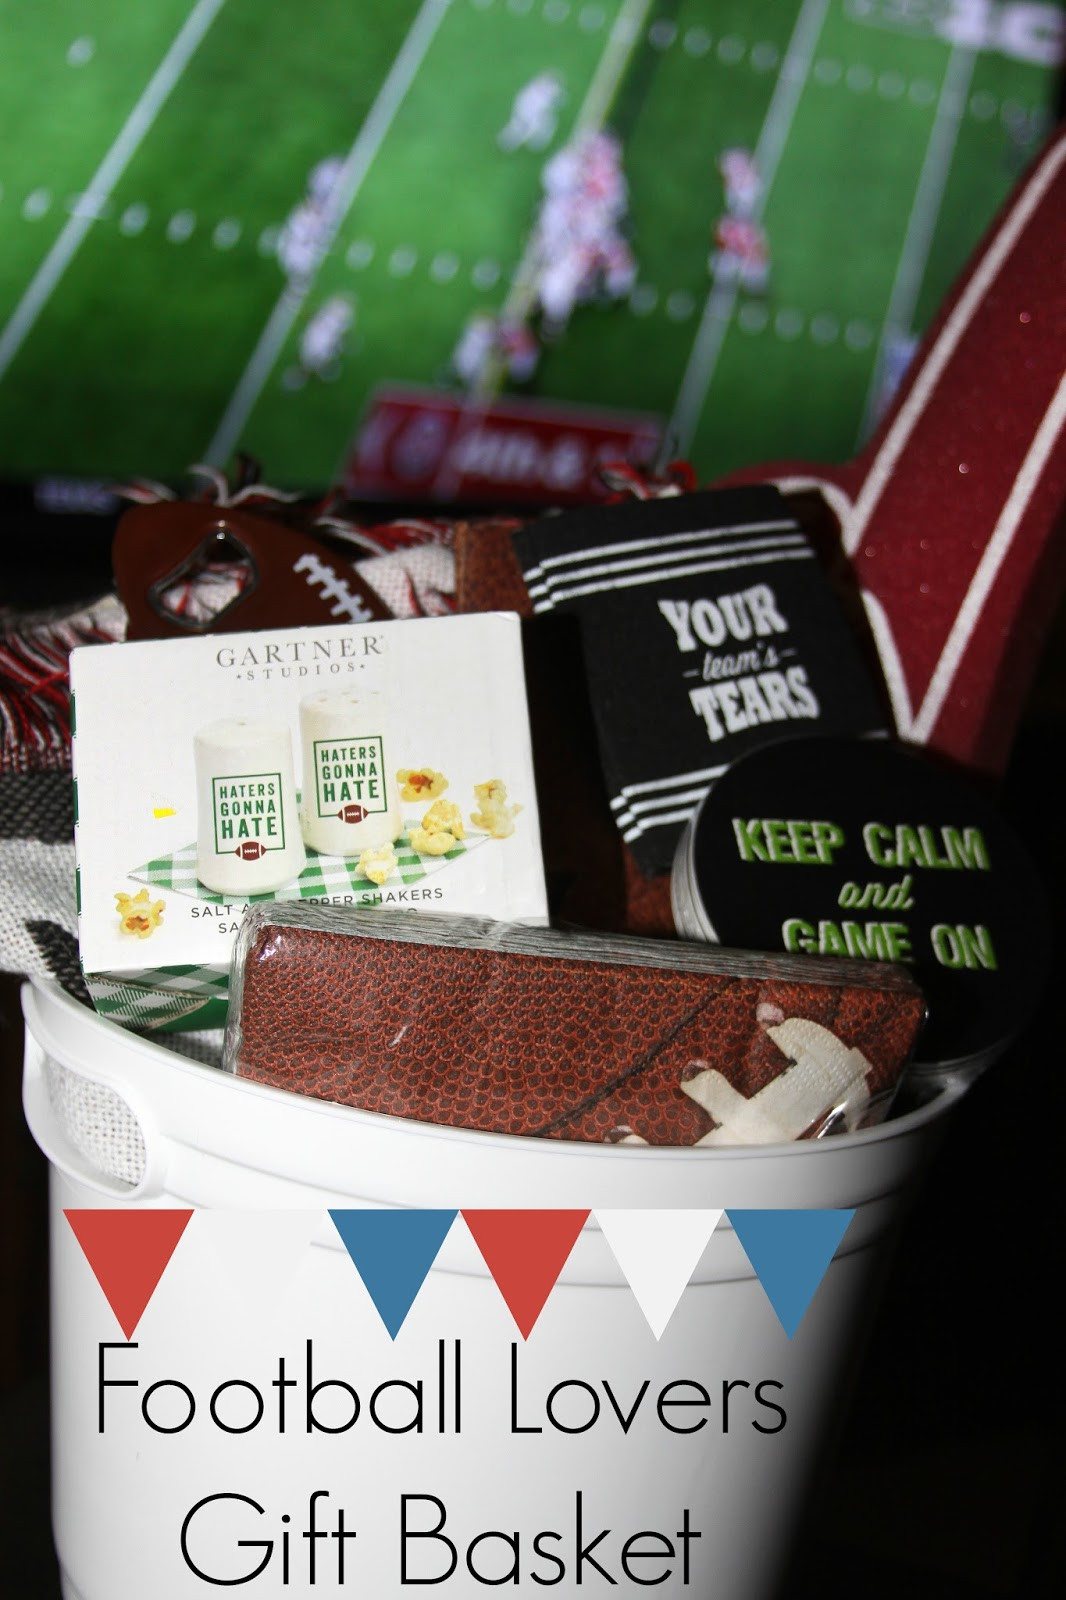 Football Gift Baskets Ideas
 For the Love of Food DIY Football Lovers Gift Basket